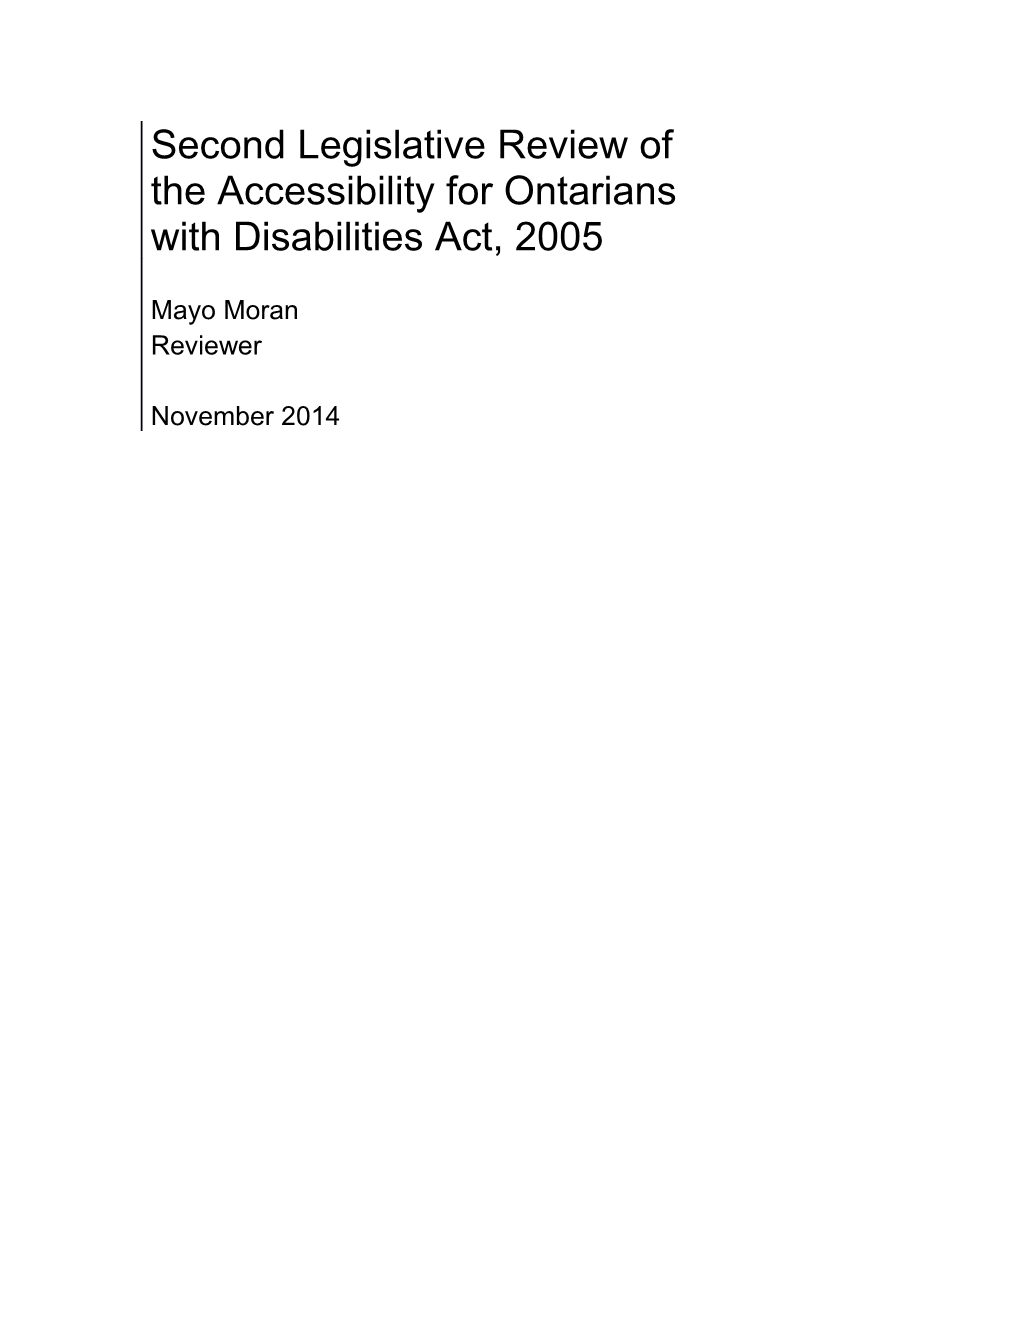 Second Legislative Review of the Accessibility for Ontarians with Disabilities Act, 2005 1